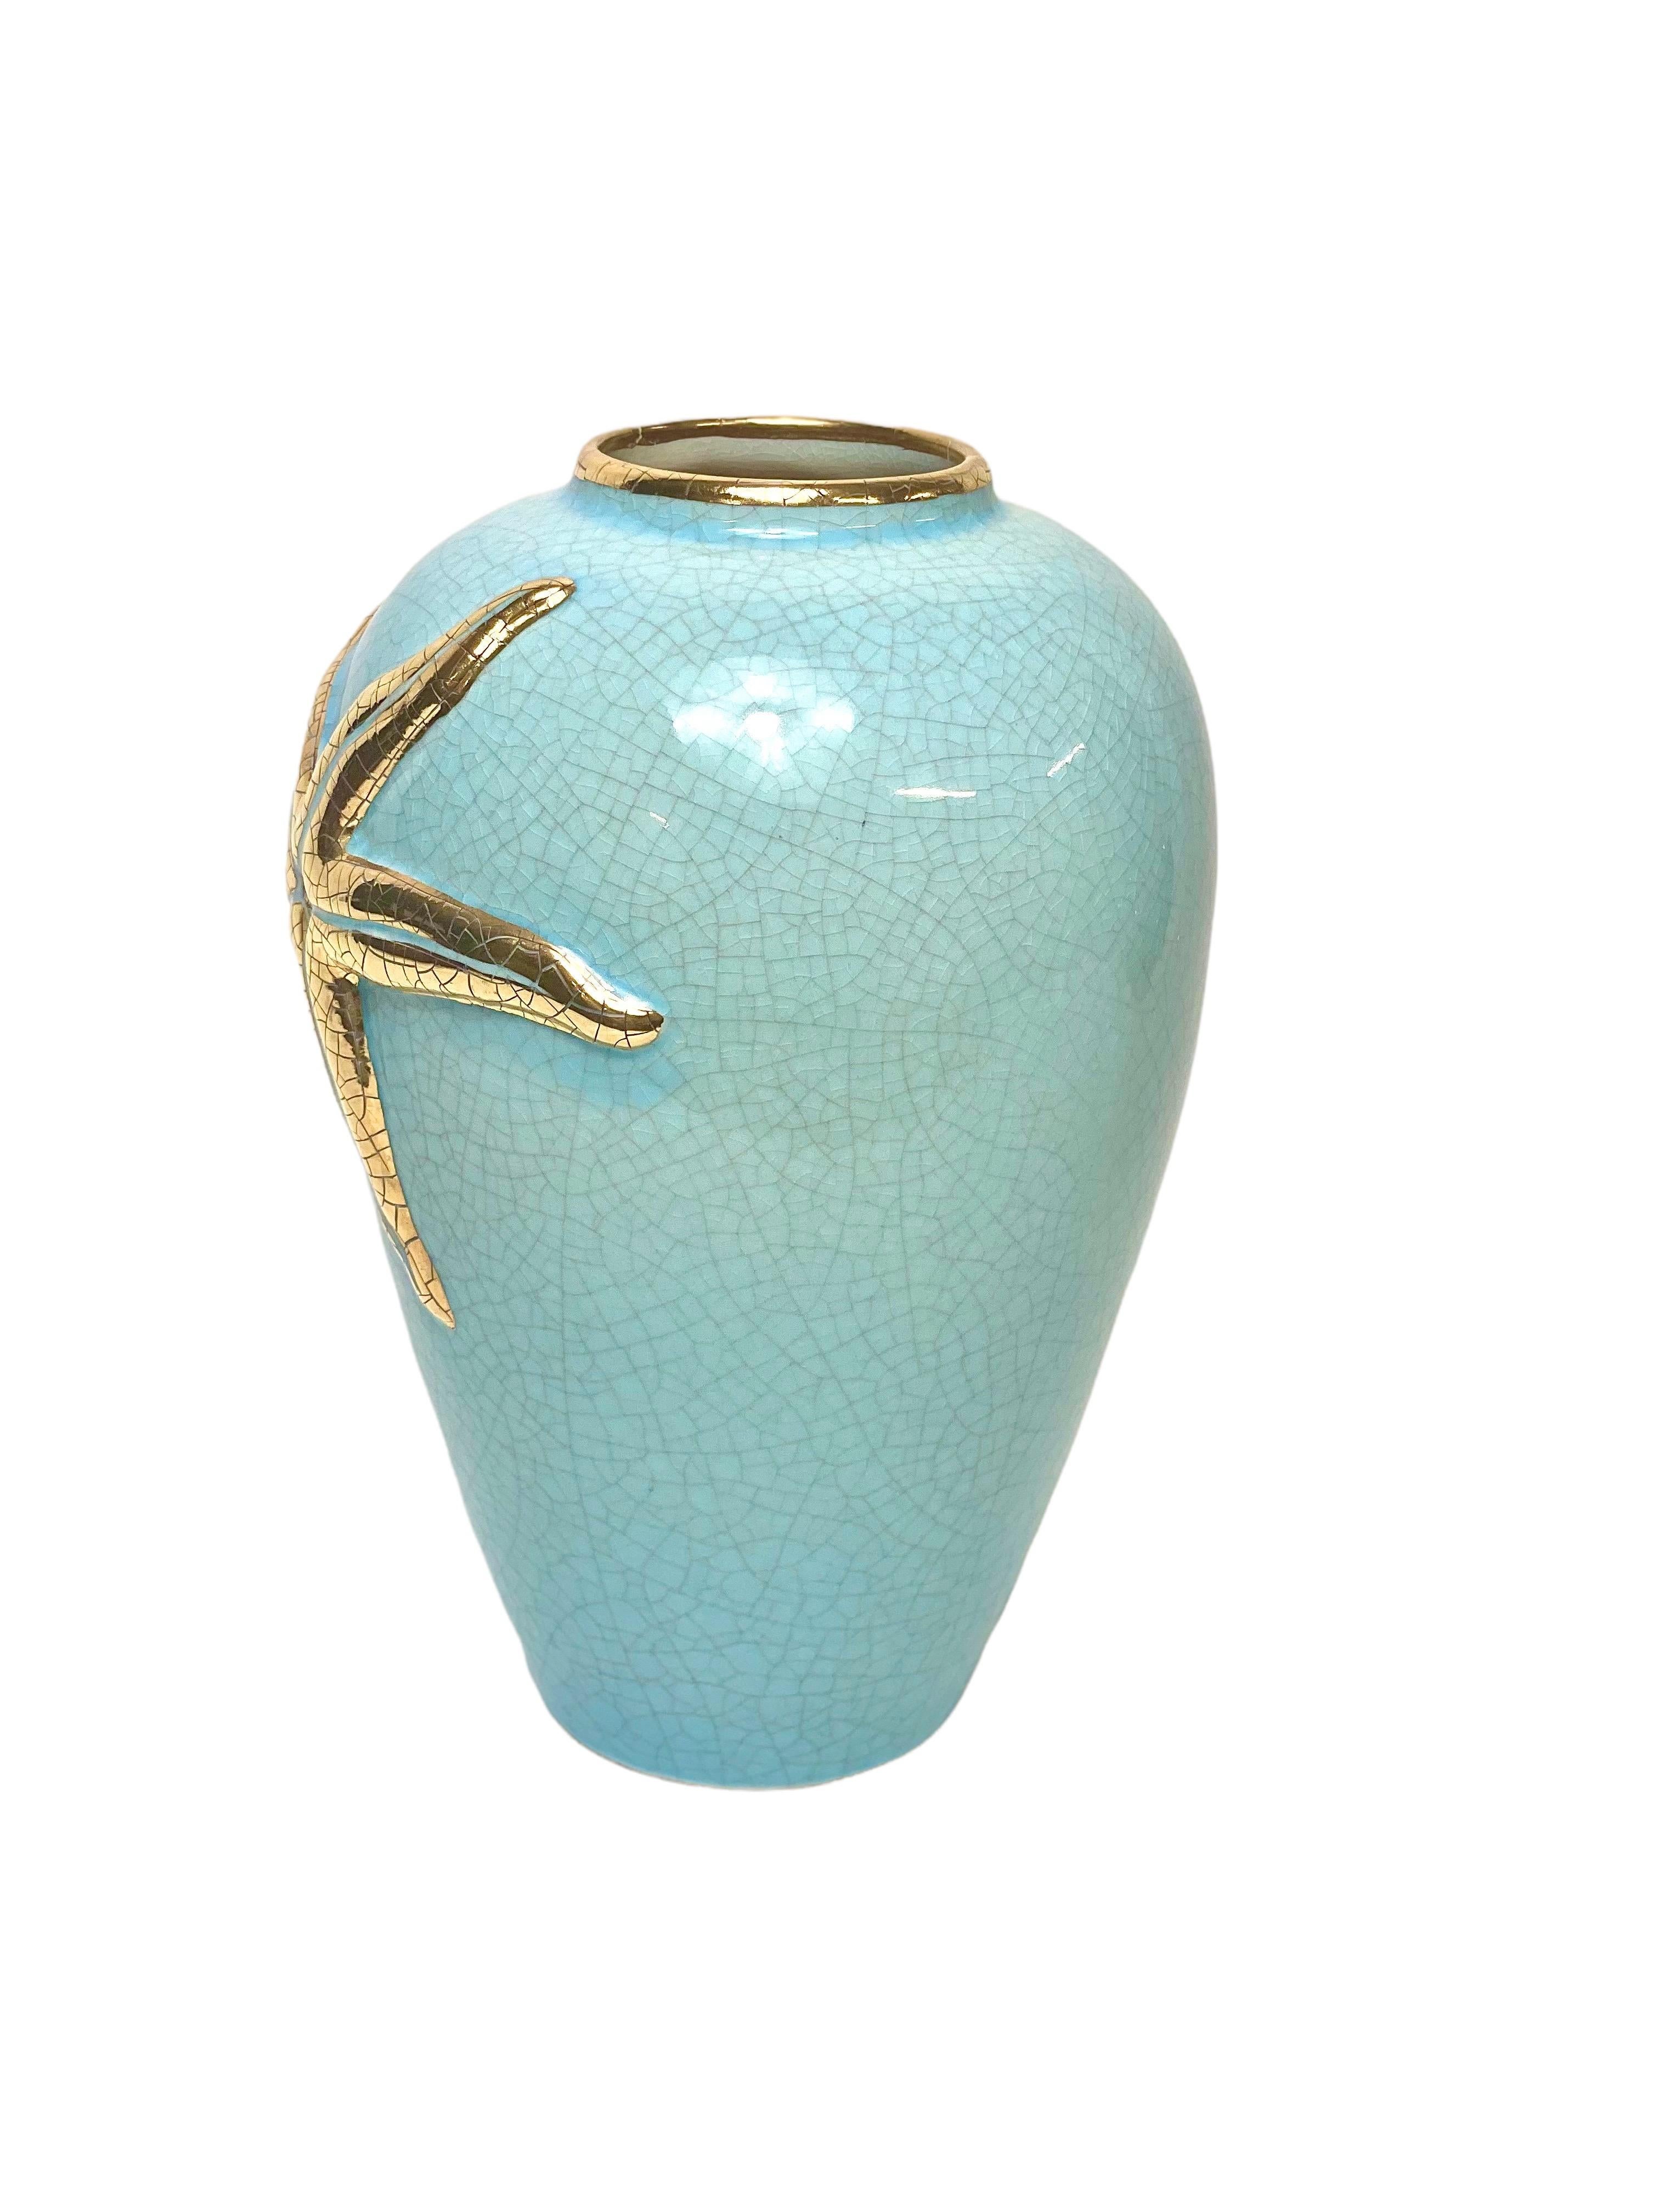 An unusual Longwy enamel decorated vase, in the characteristic colour ‘bleu de Longwy’, and featuring a finely crackled golden starfish splayed over its surface. The Longwy earthenware factory was founded in 1798, and their ceramics became